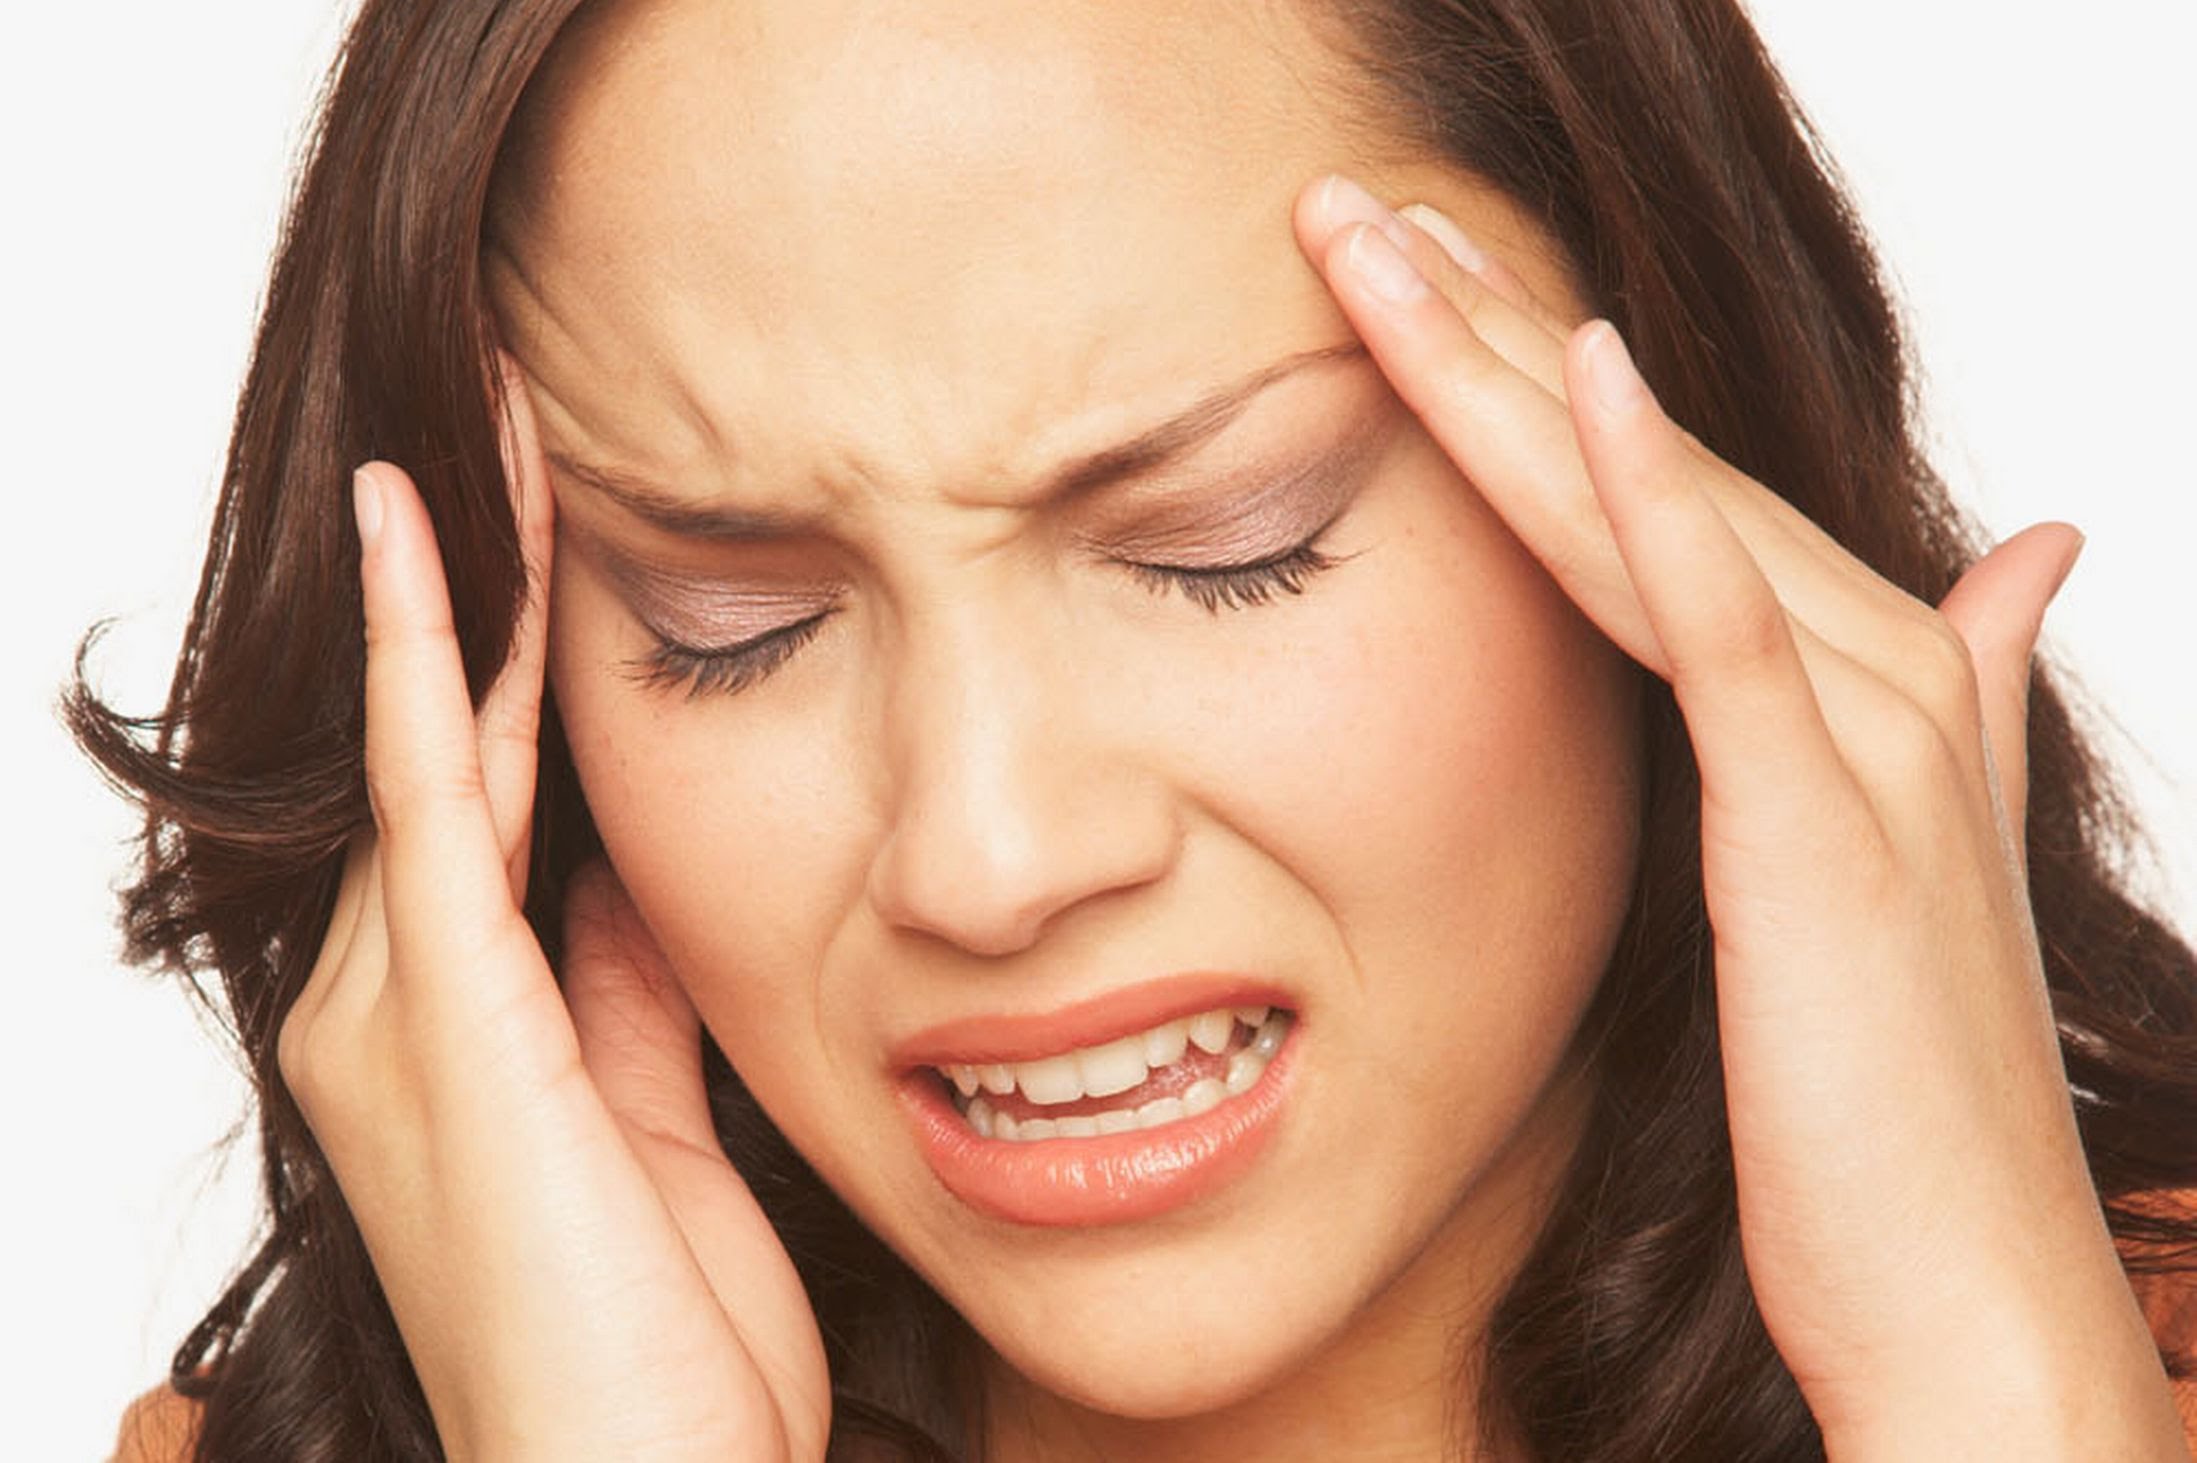 How to Get Rid of Migraines